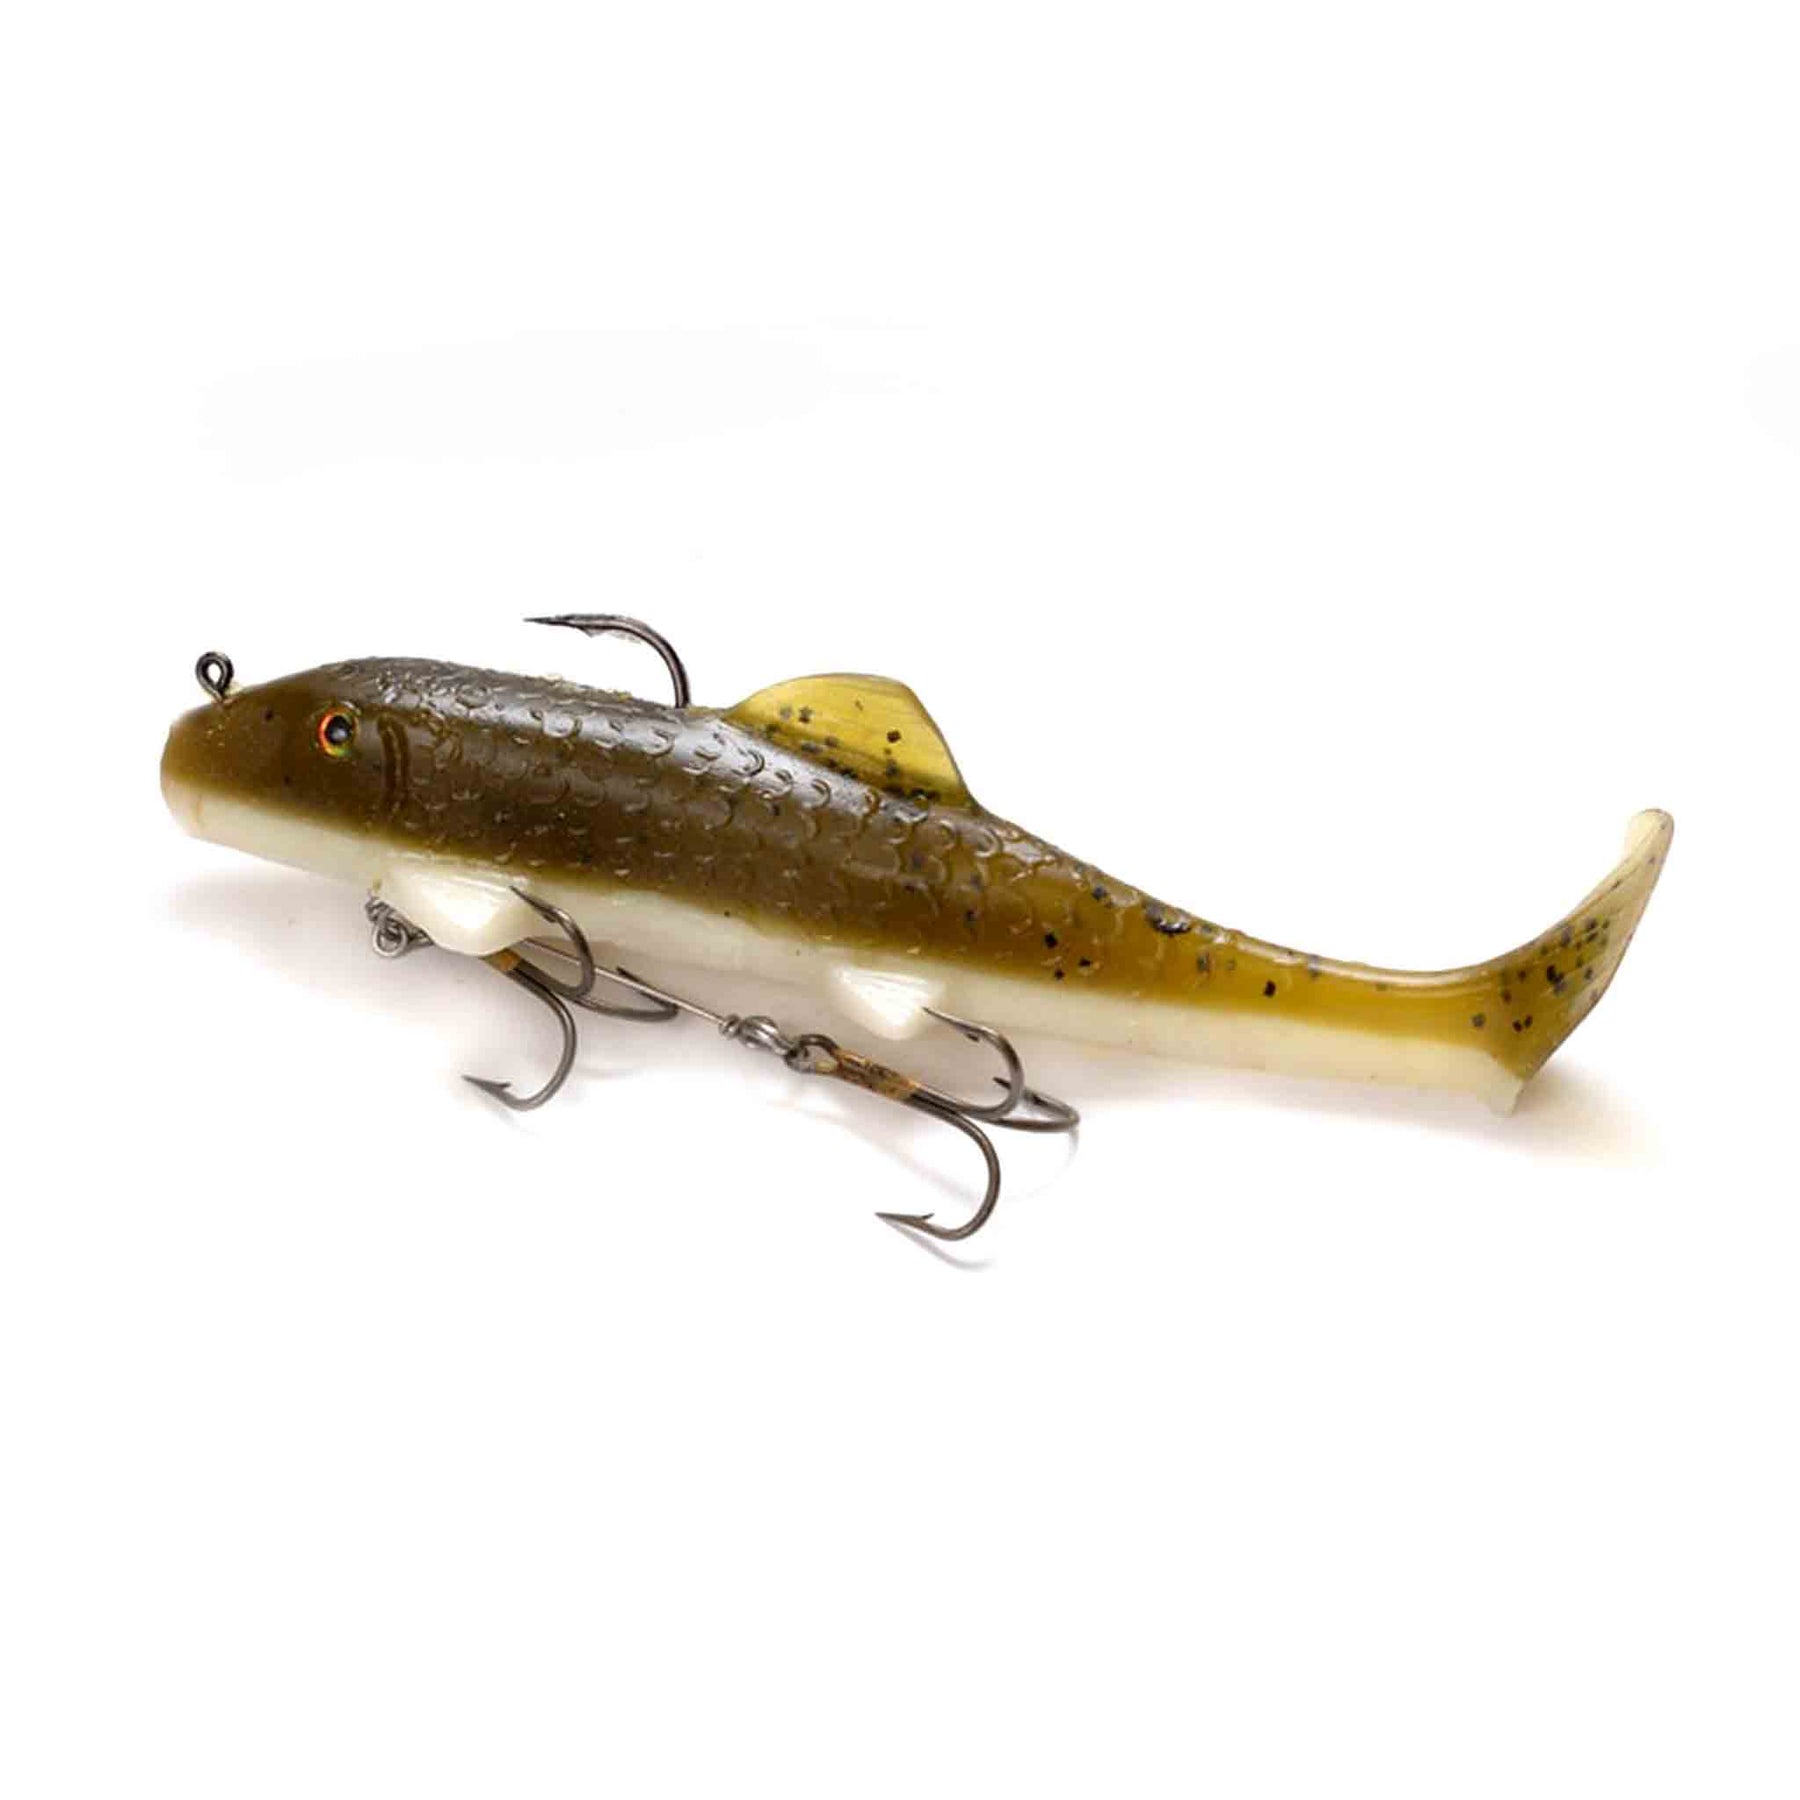 View of Rubber Suick Suzy Sucker 9" Swimbait Light Sucker available at EZOKO Pike and Musky Shop